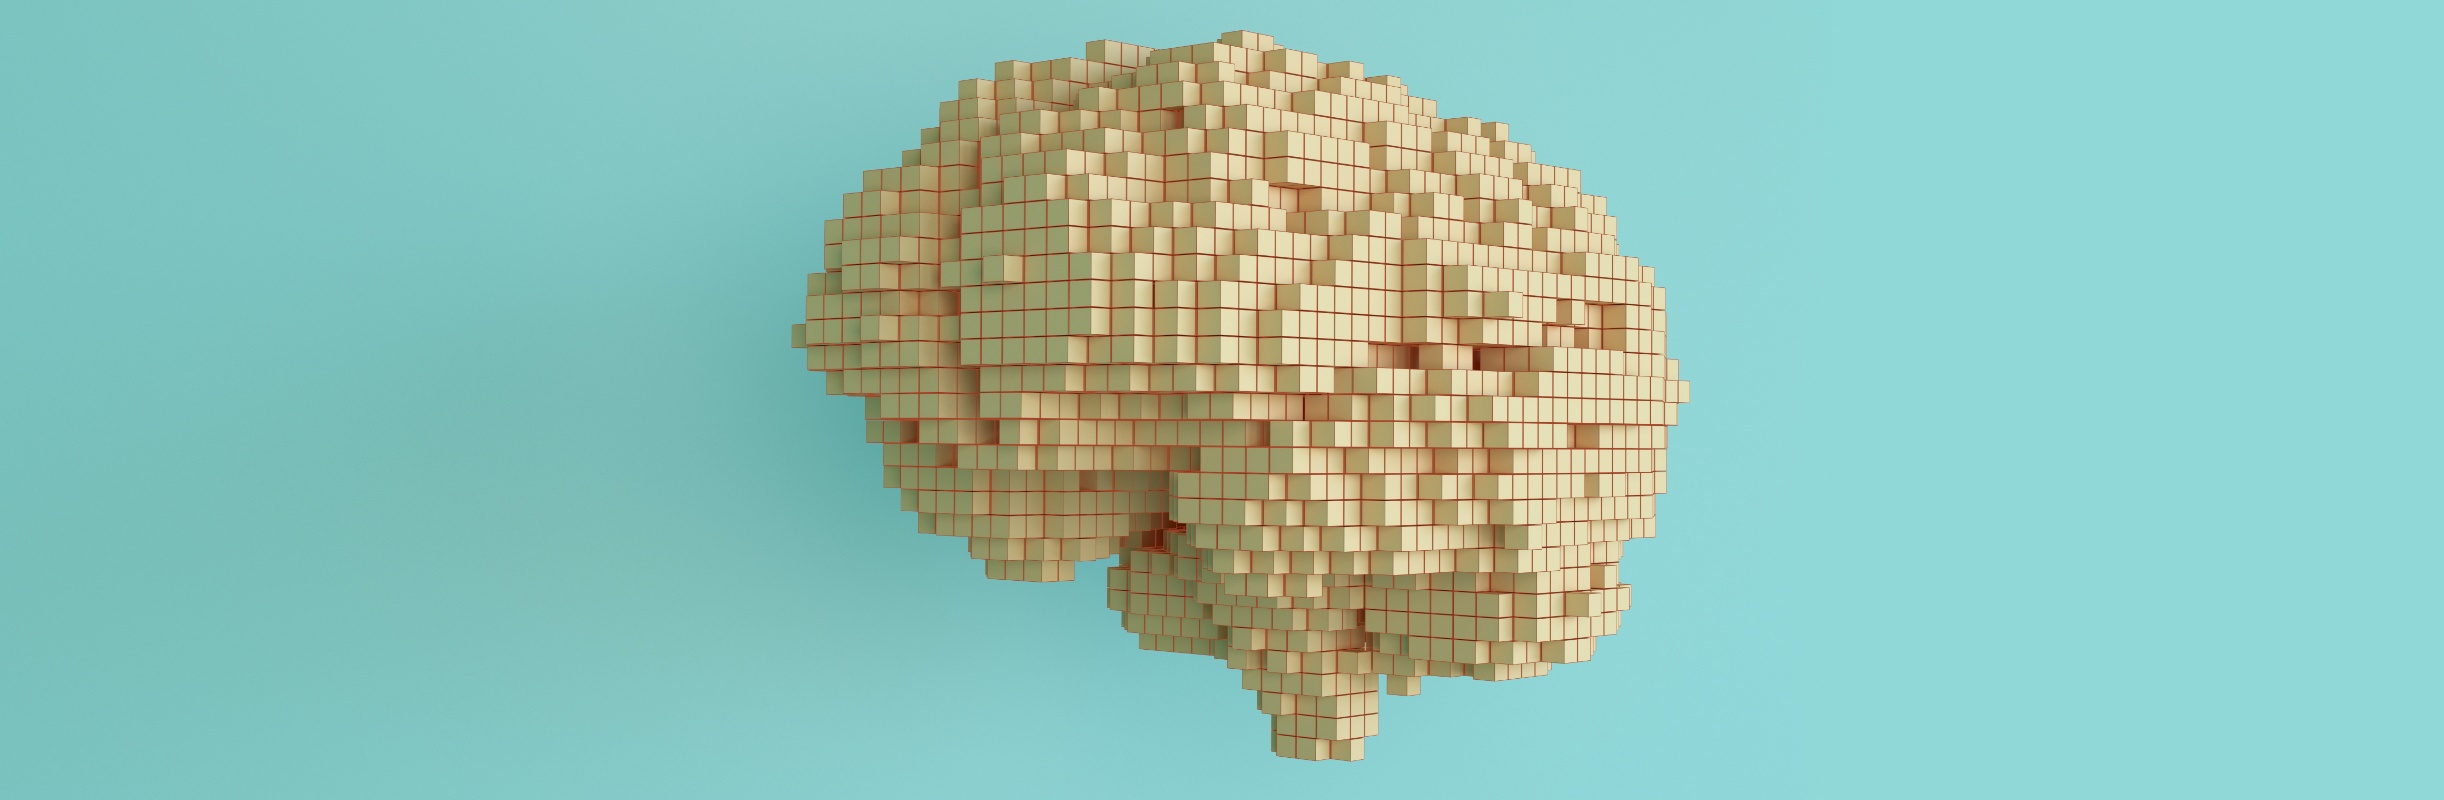 Rendition of human brain made of small cubes